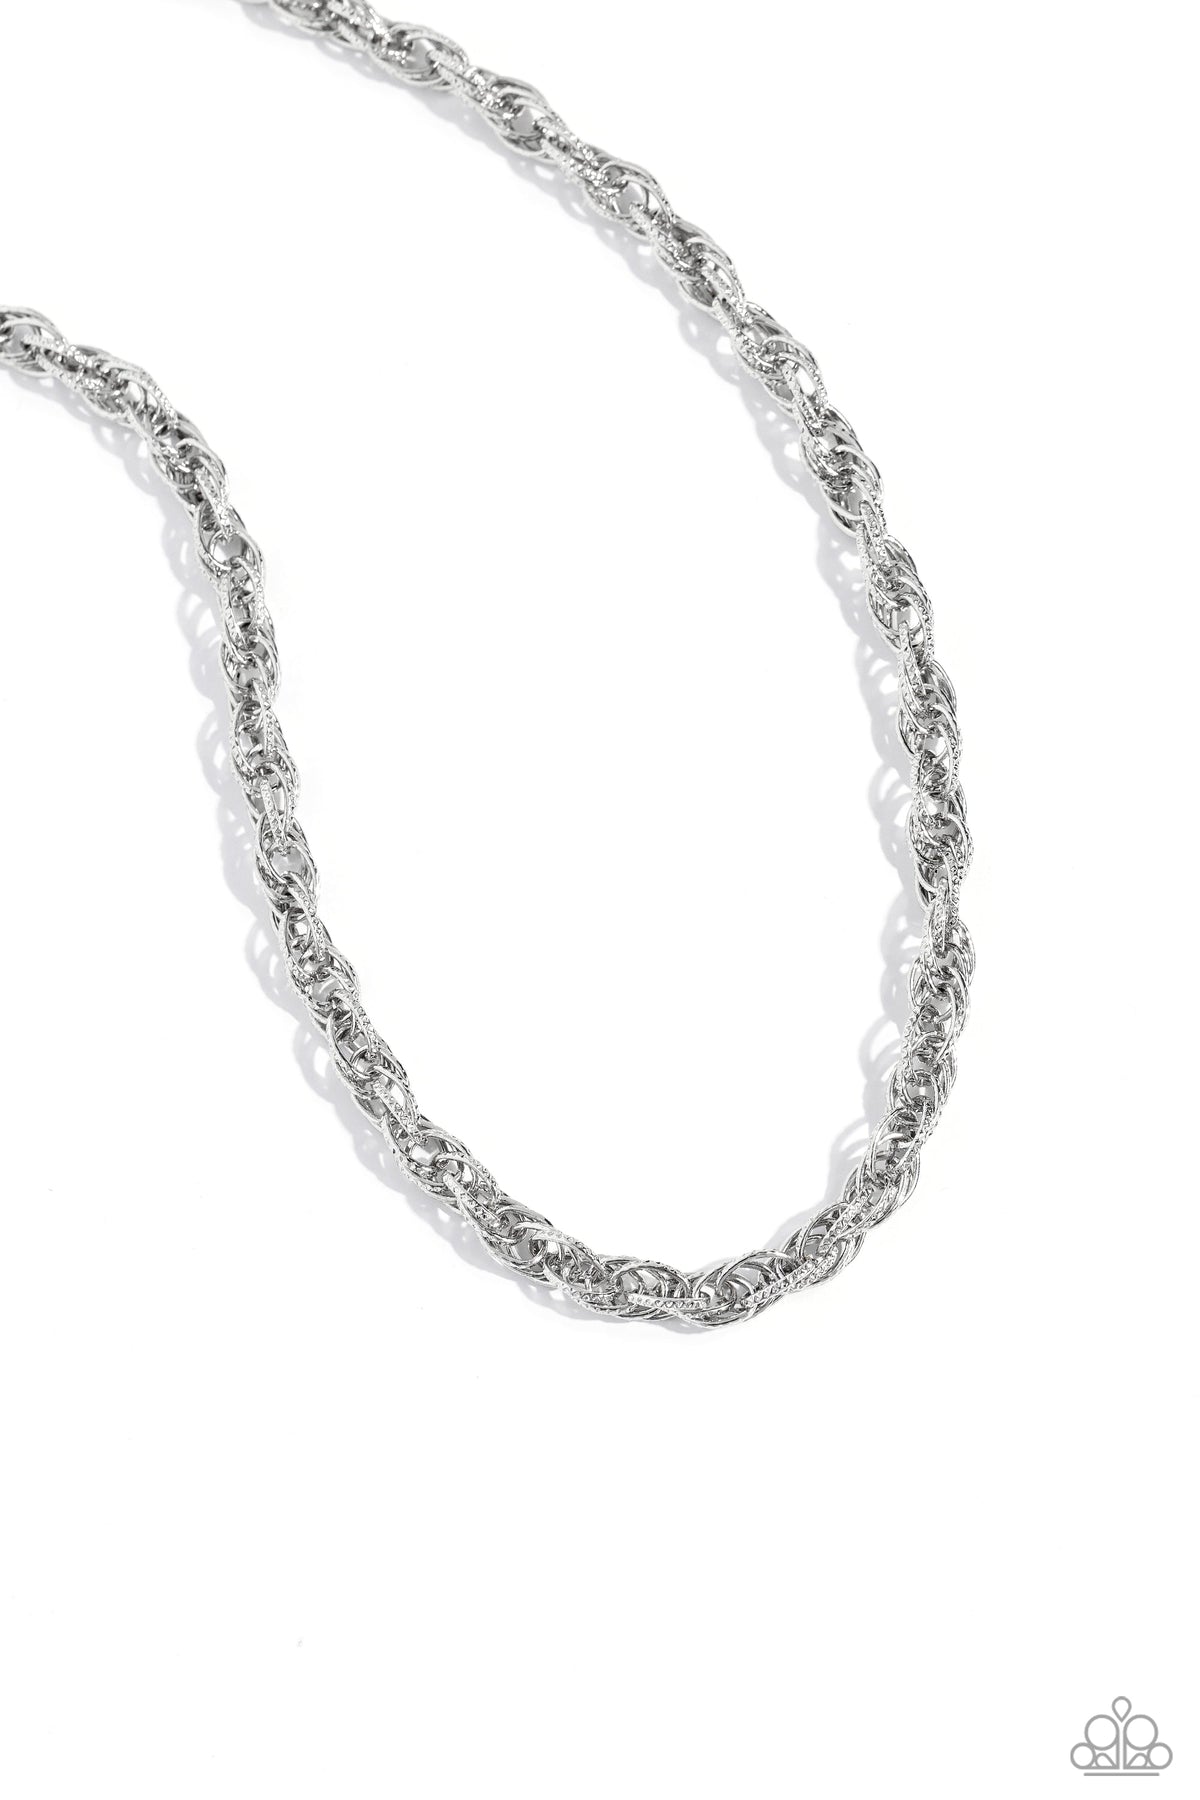 Braided Ballad Silver Chain Necklace - Paparazzi Accessories- lightbox - CarasShop.com - $5 Jewelry by Cara Jewels